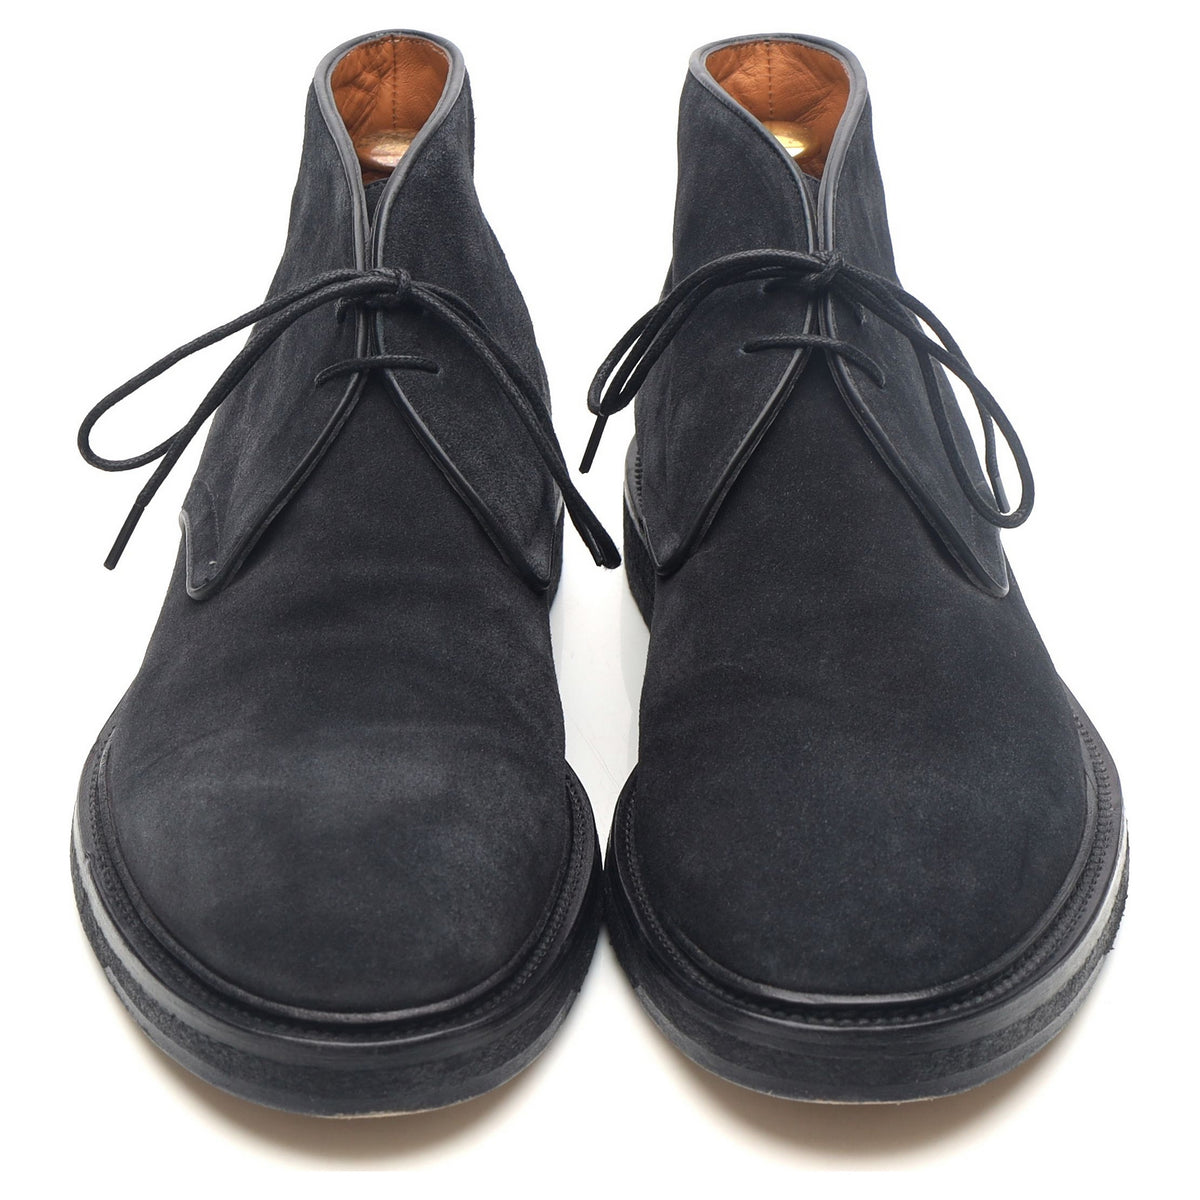 Navy Blue Suede Chukka Boots UK 8.5